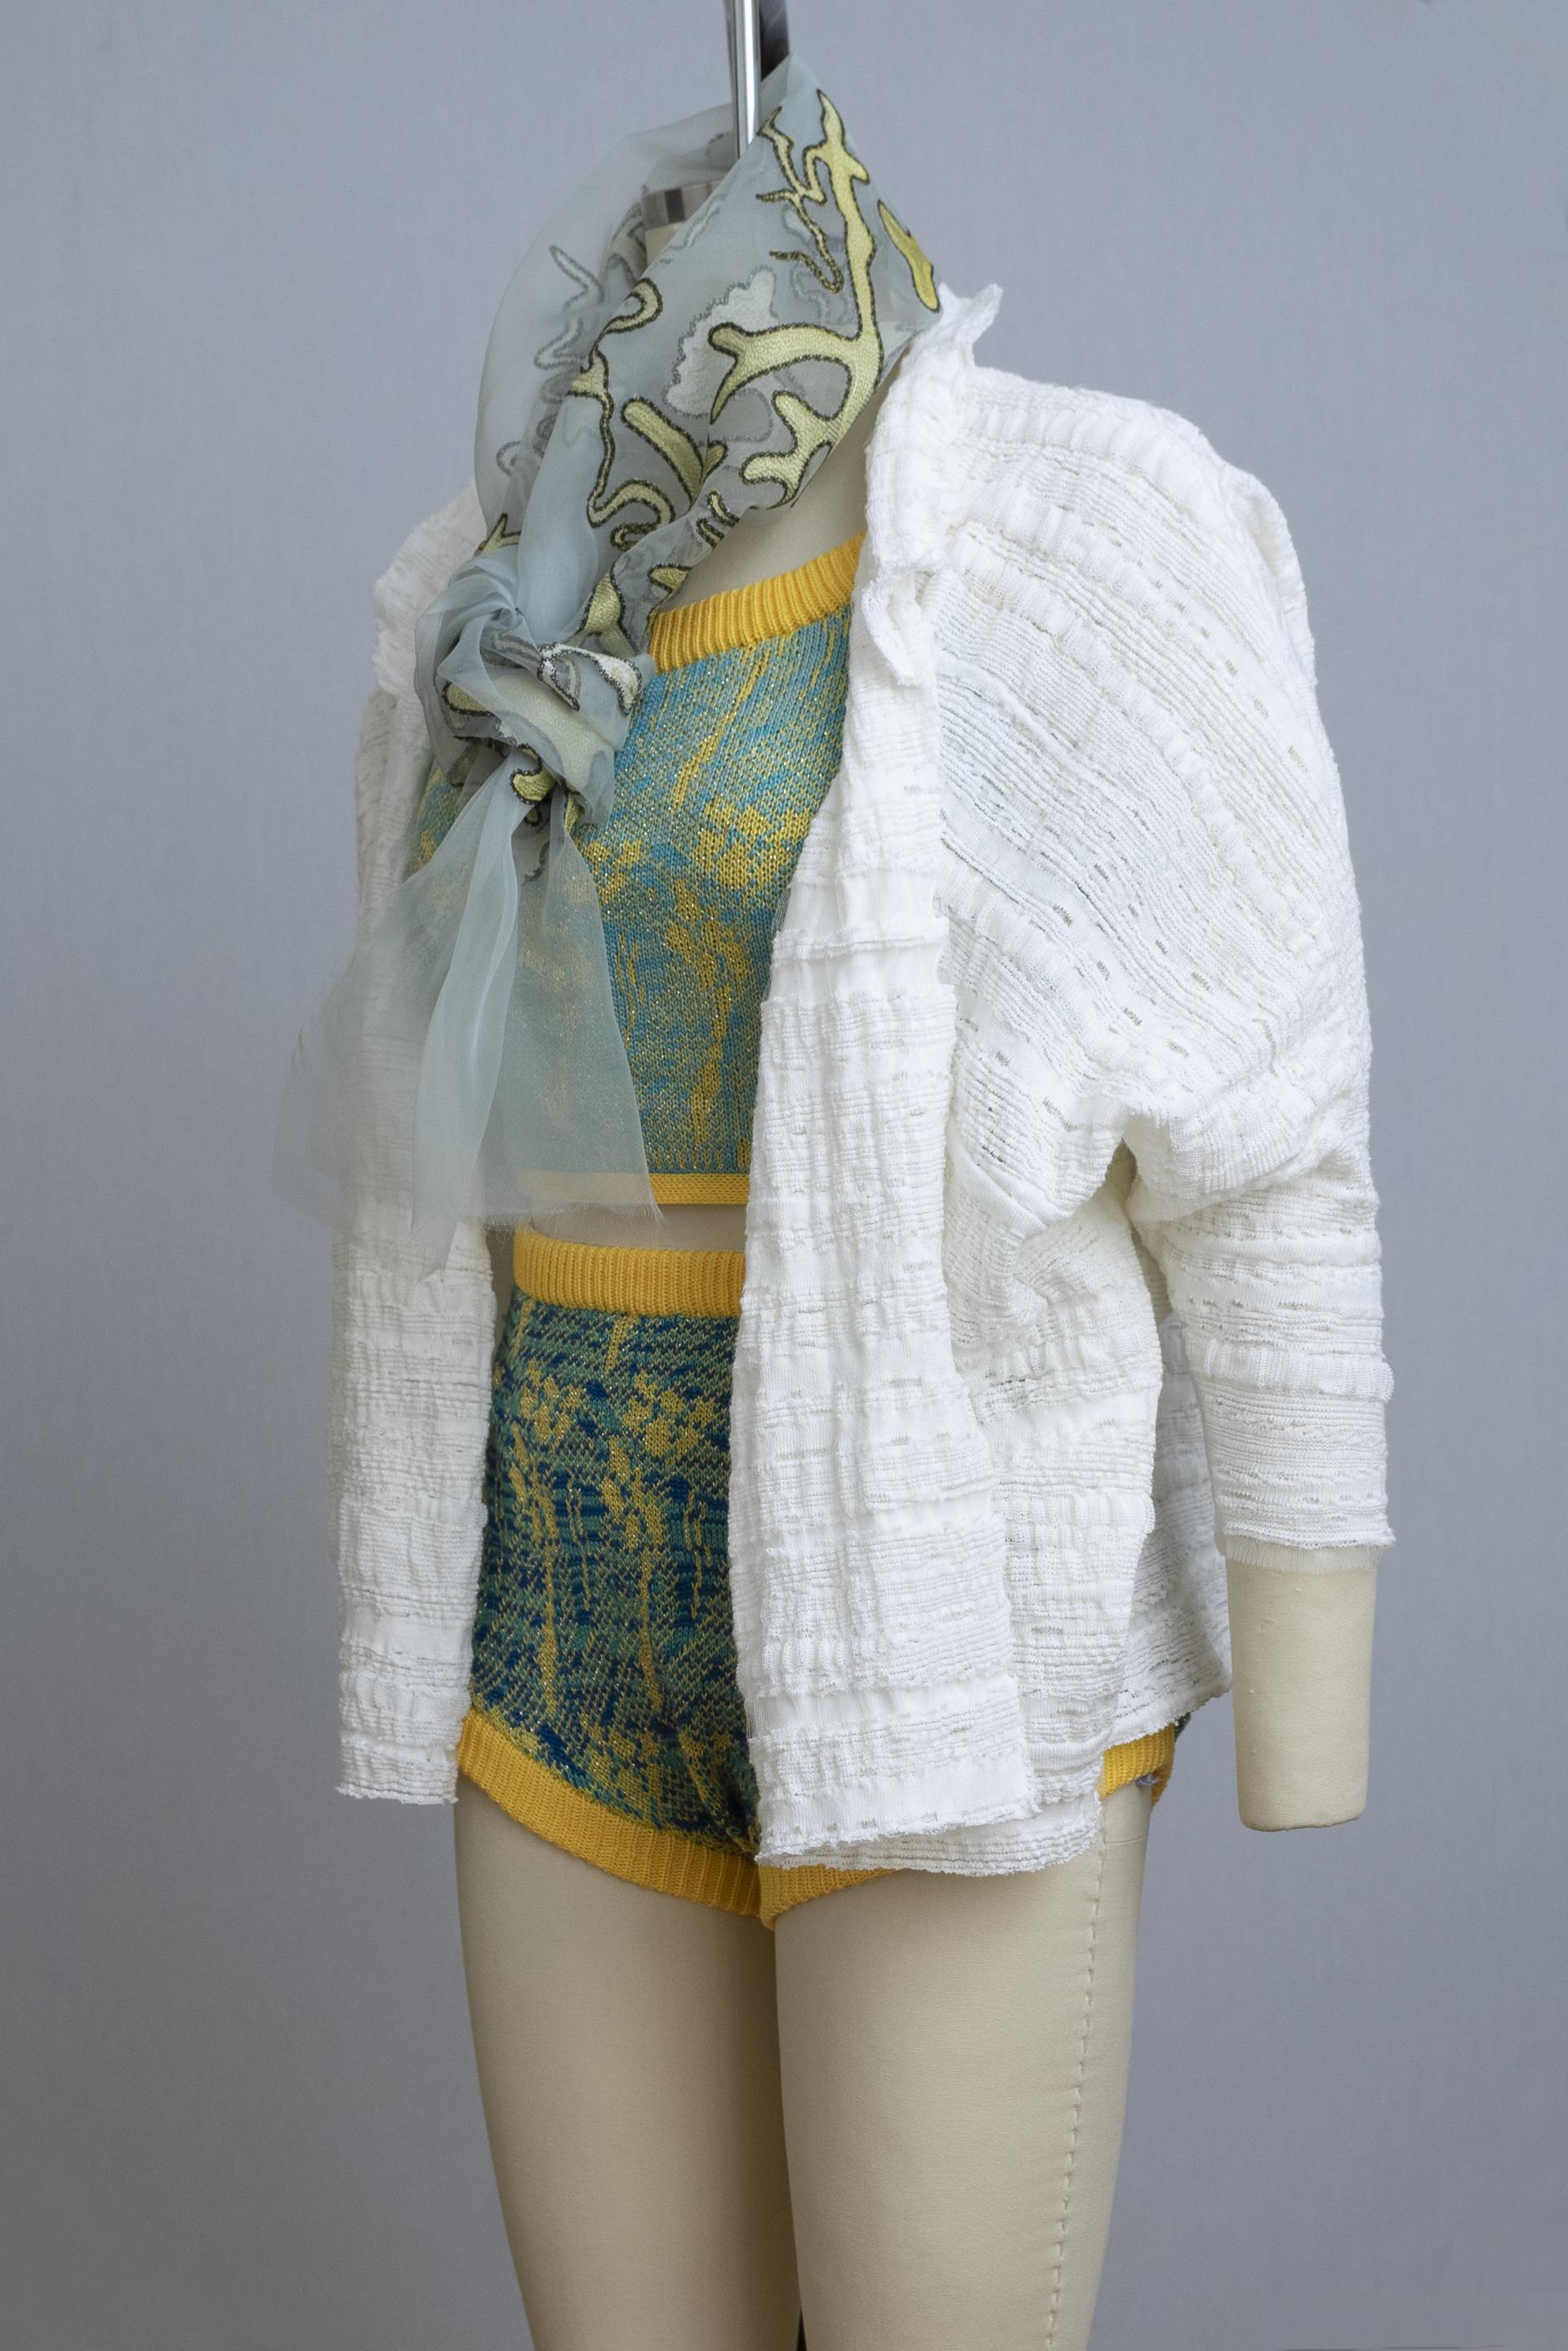 dress form wearing a knit playsuit in blues and yellows, a white knit sweater, and a sheer painted scarf